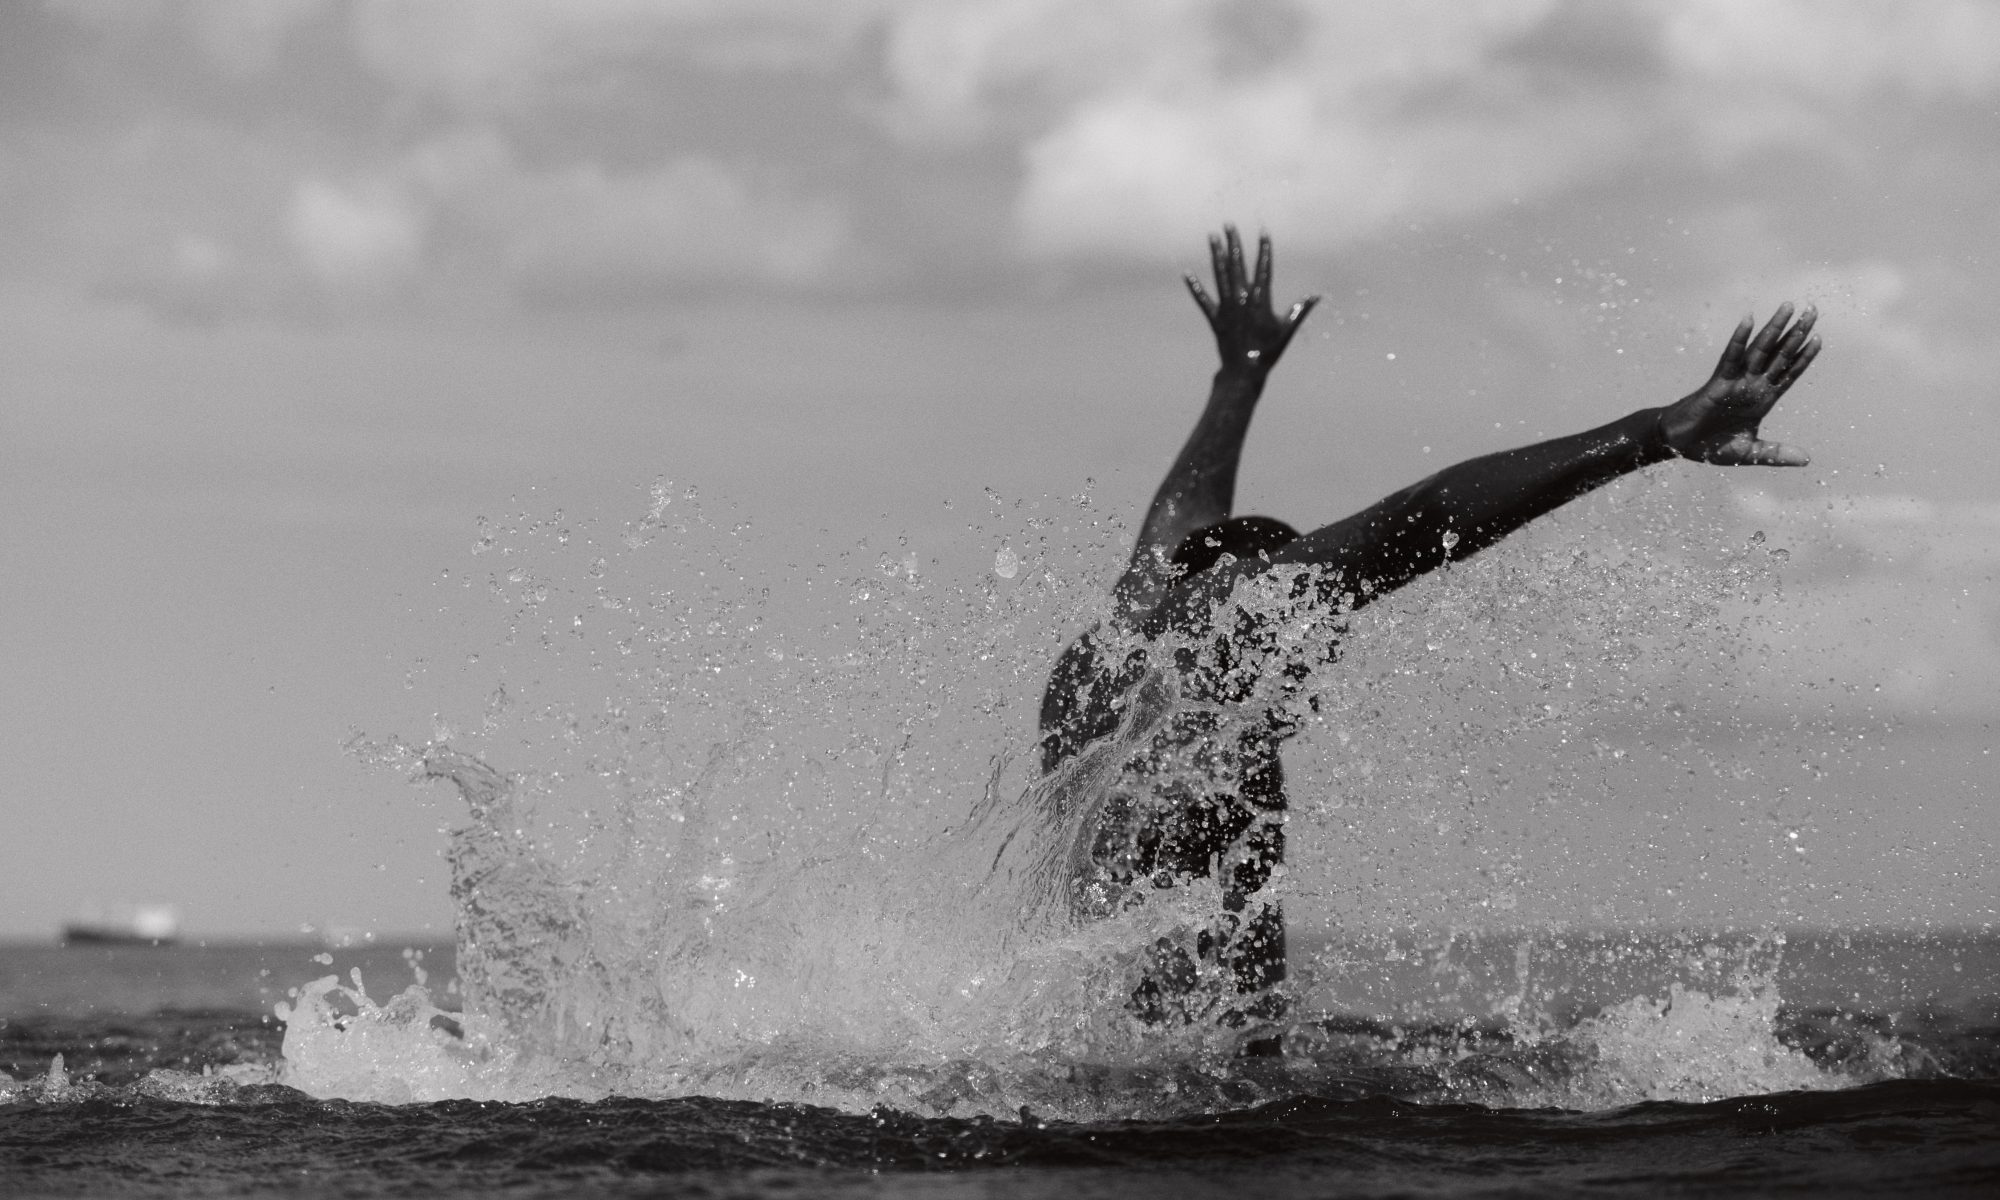 A dancer emerging from the ocean with their arms raised as water splashes around them